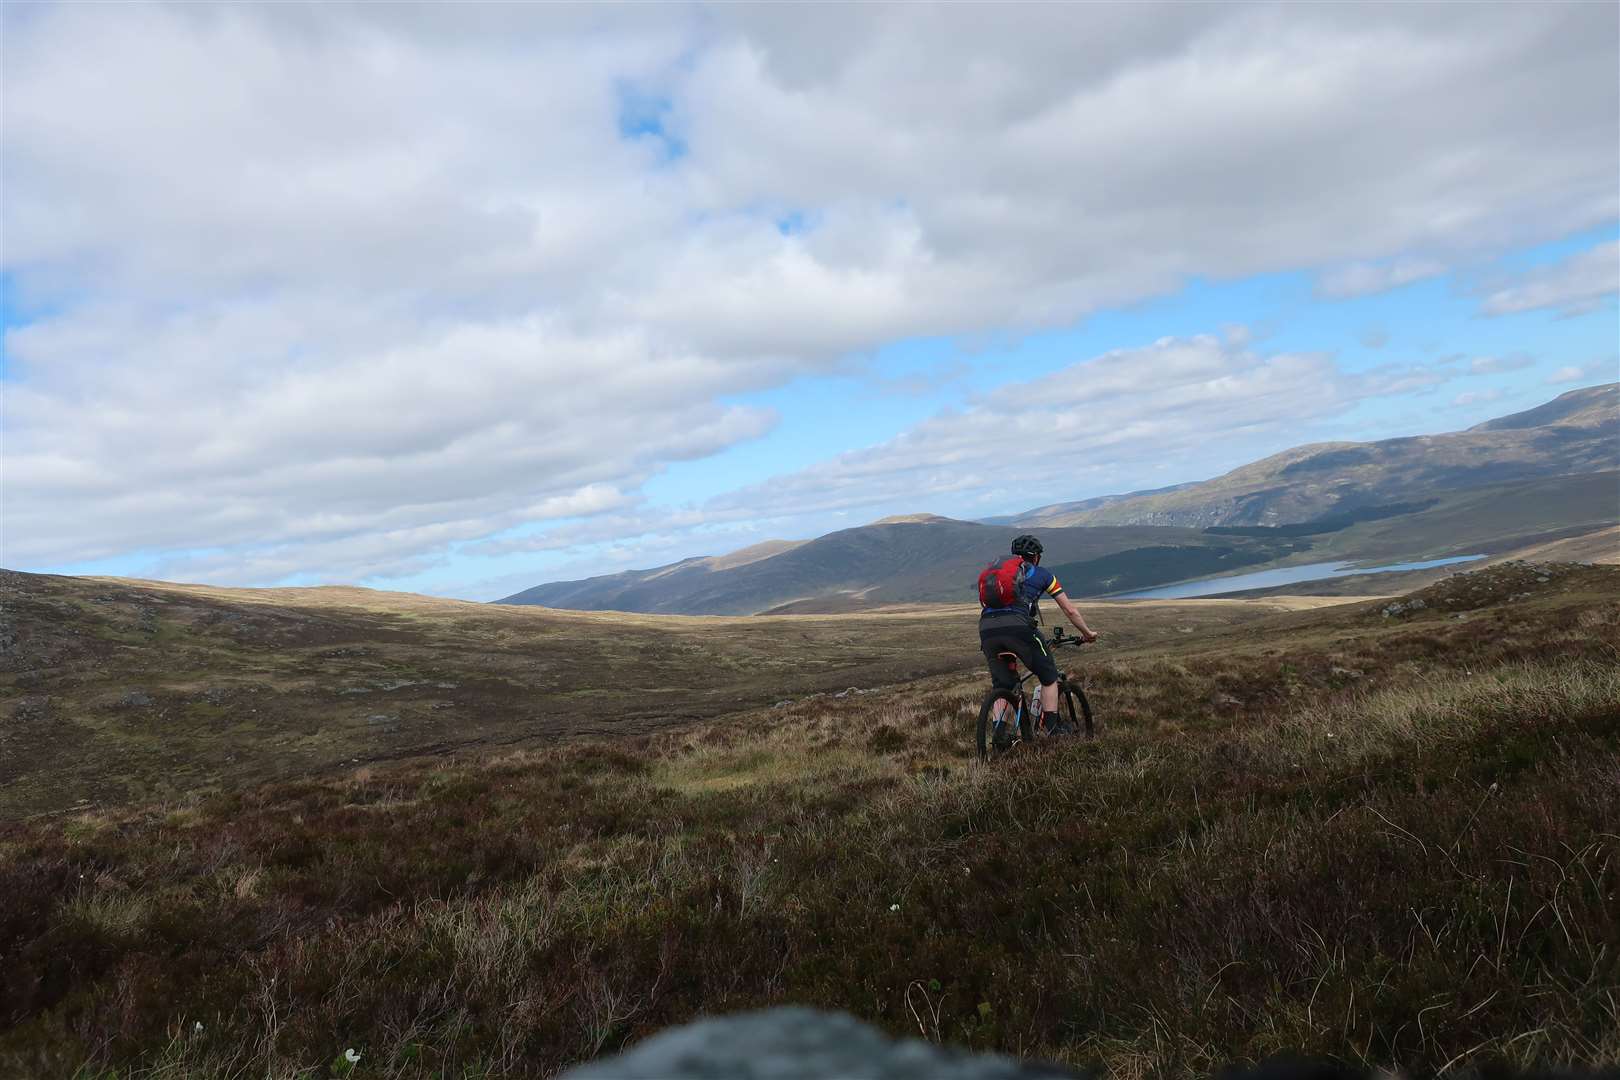 On the singletrack descent to Loch Pattack.